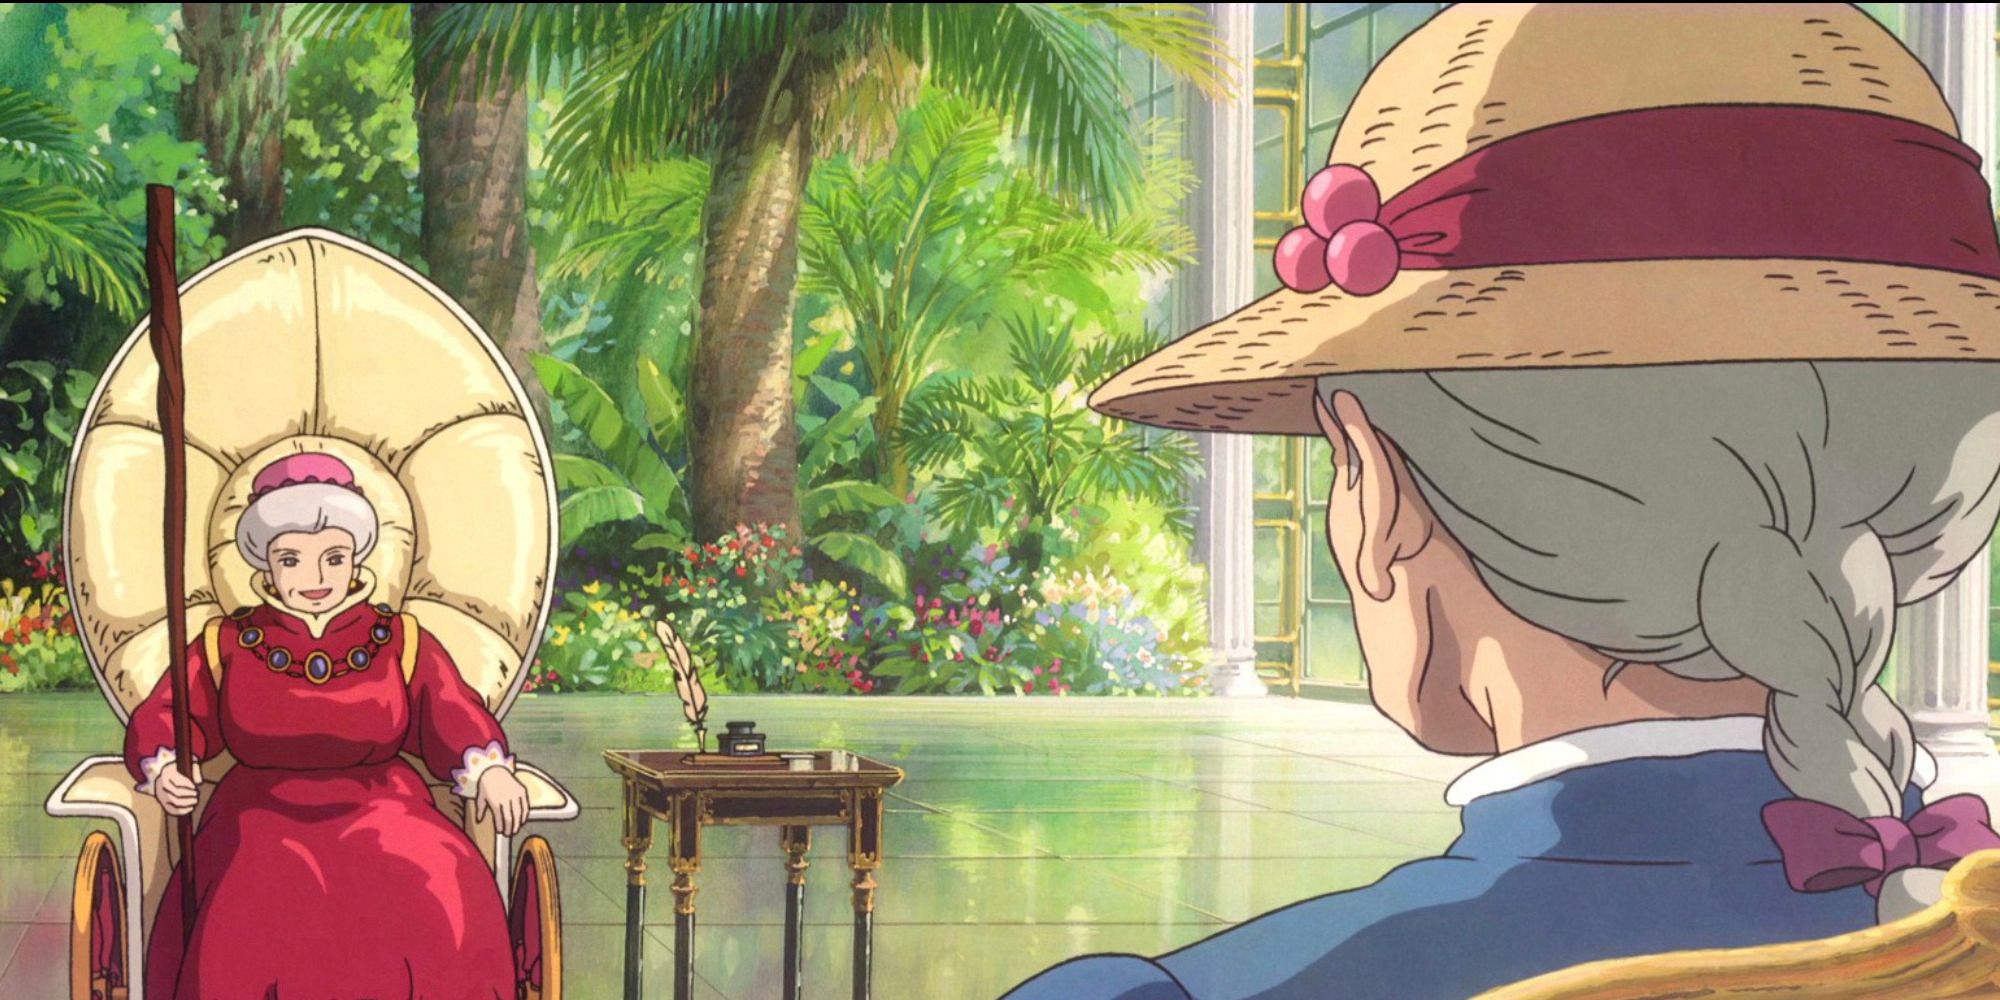 Sophie and Madame Suliman talk near a lake in Howl's Moving Castle